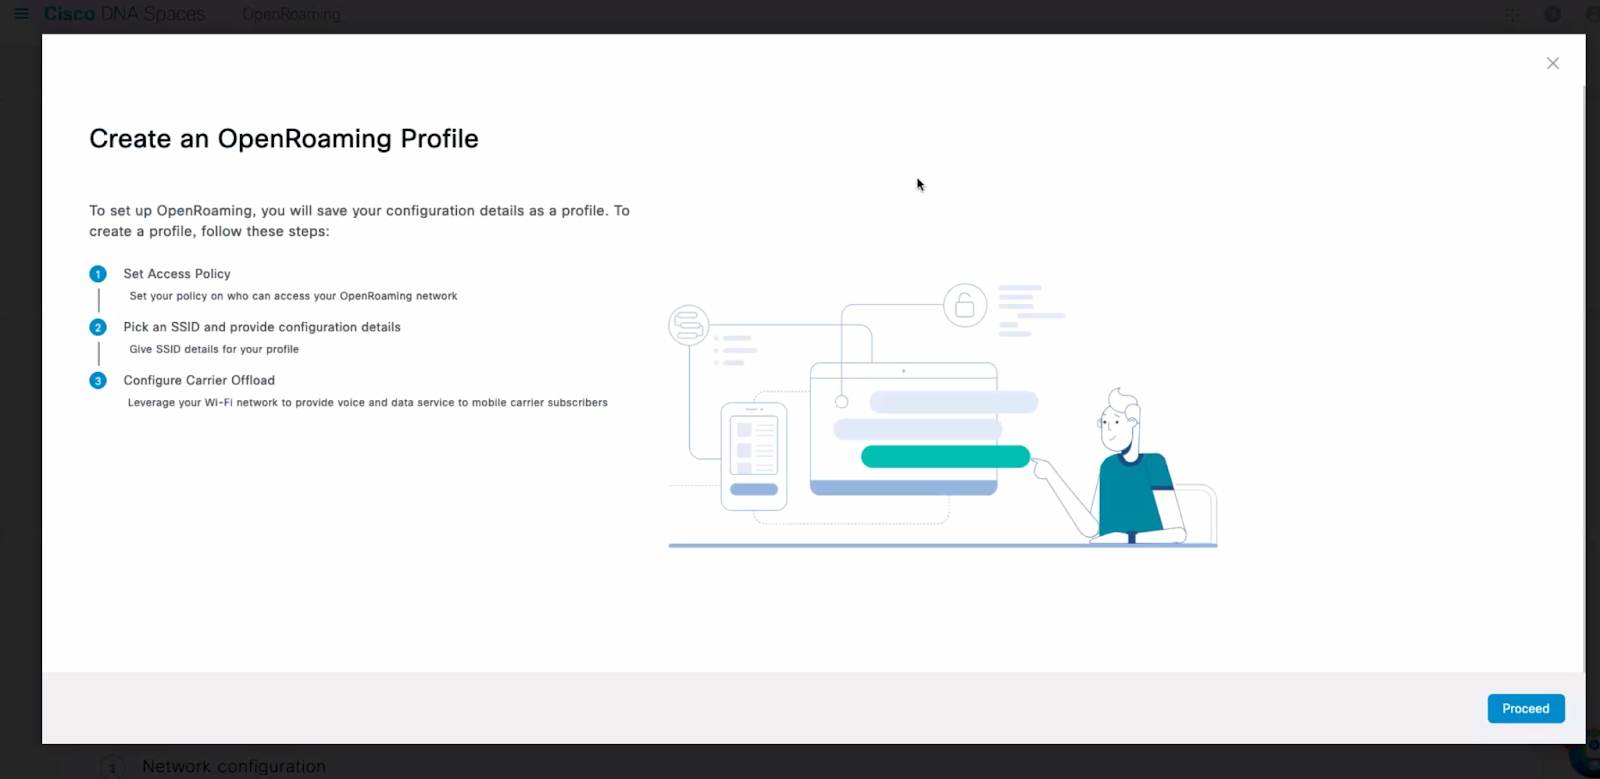 Follow the steps shown by the Spaces UI to create an OpenRoaming profile.